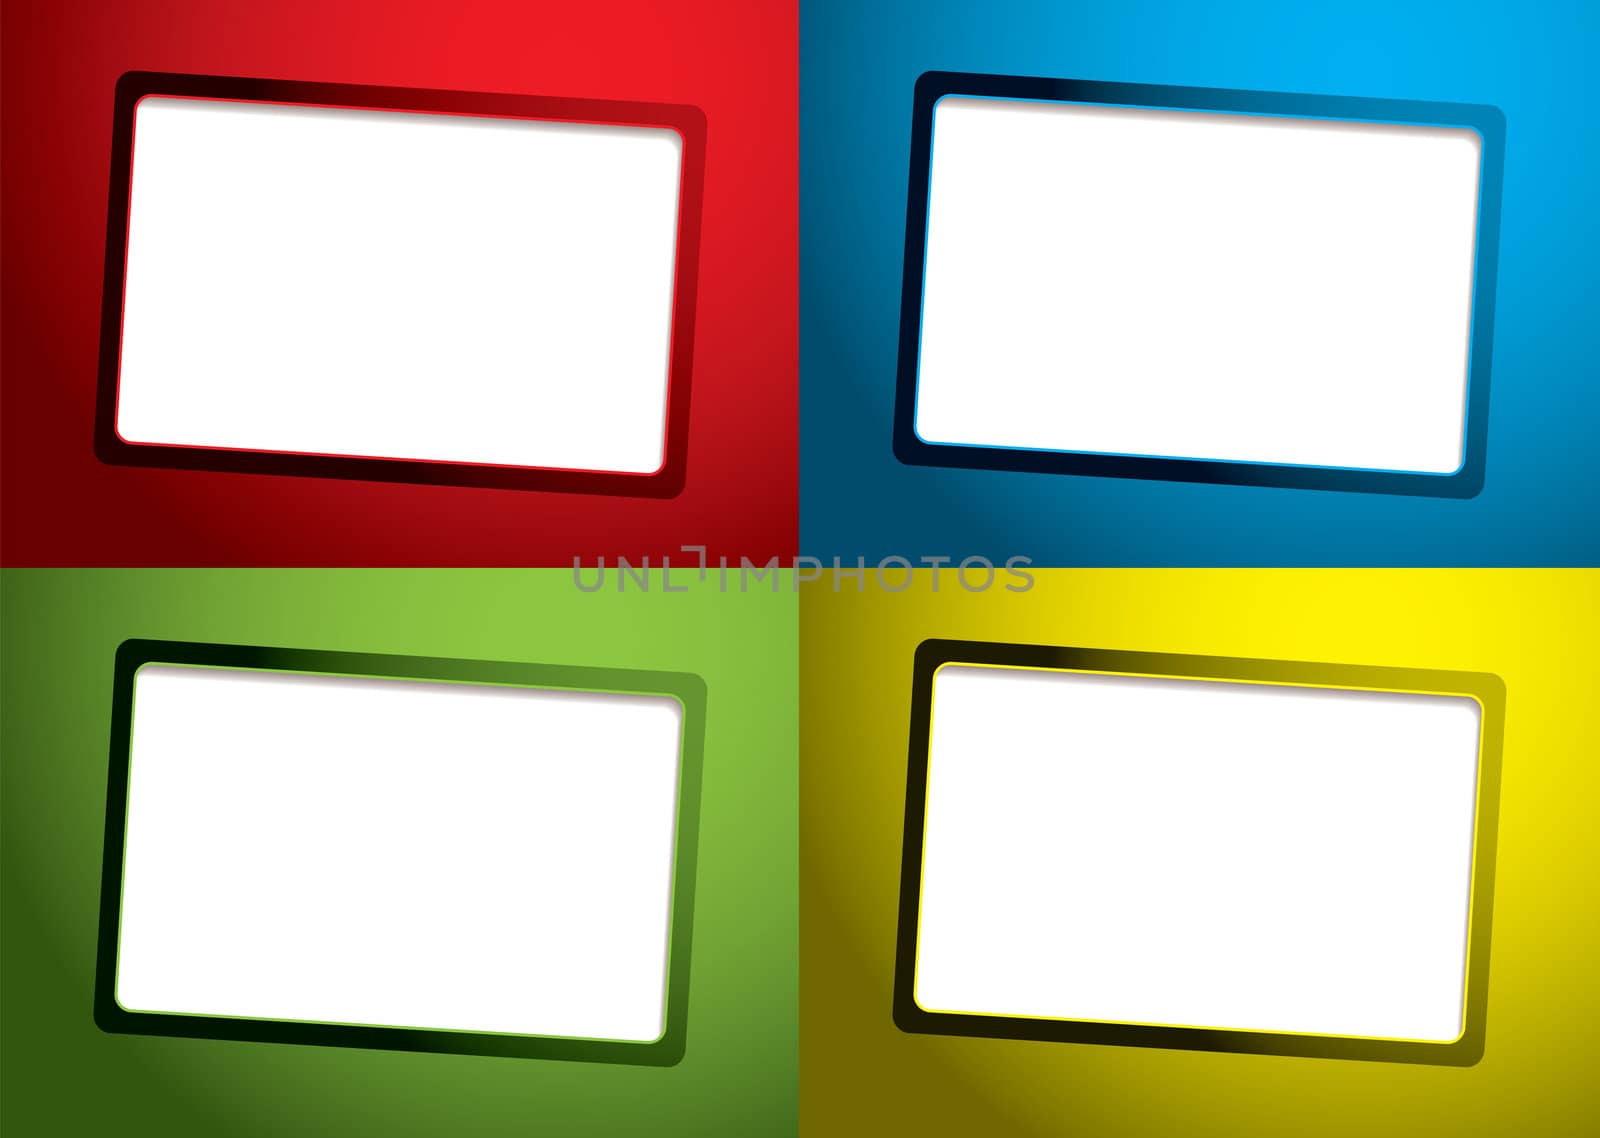 Collection of business cards with brightly colored background and shadow